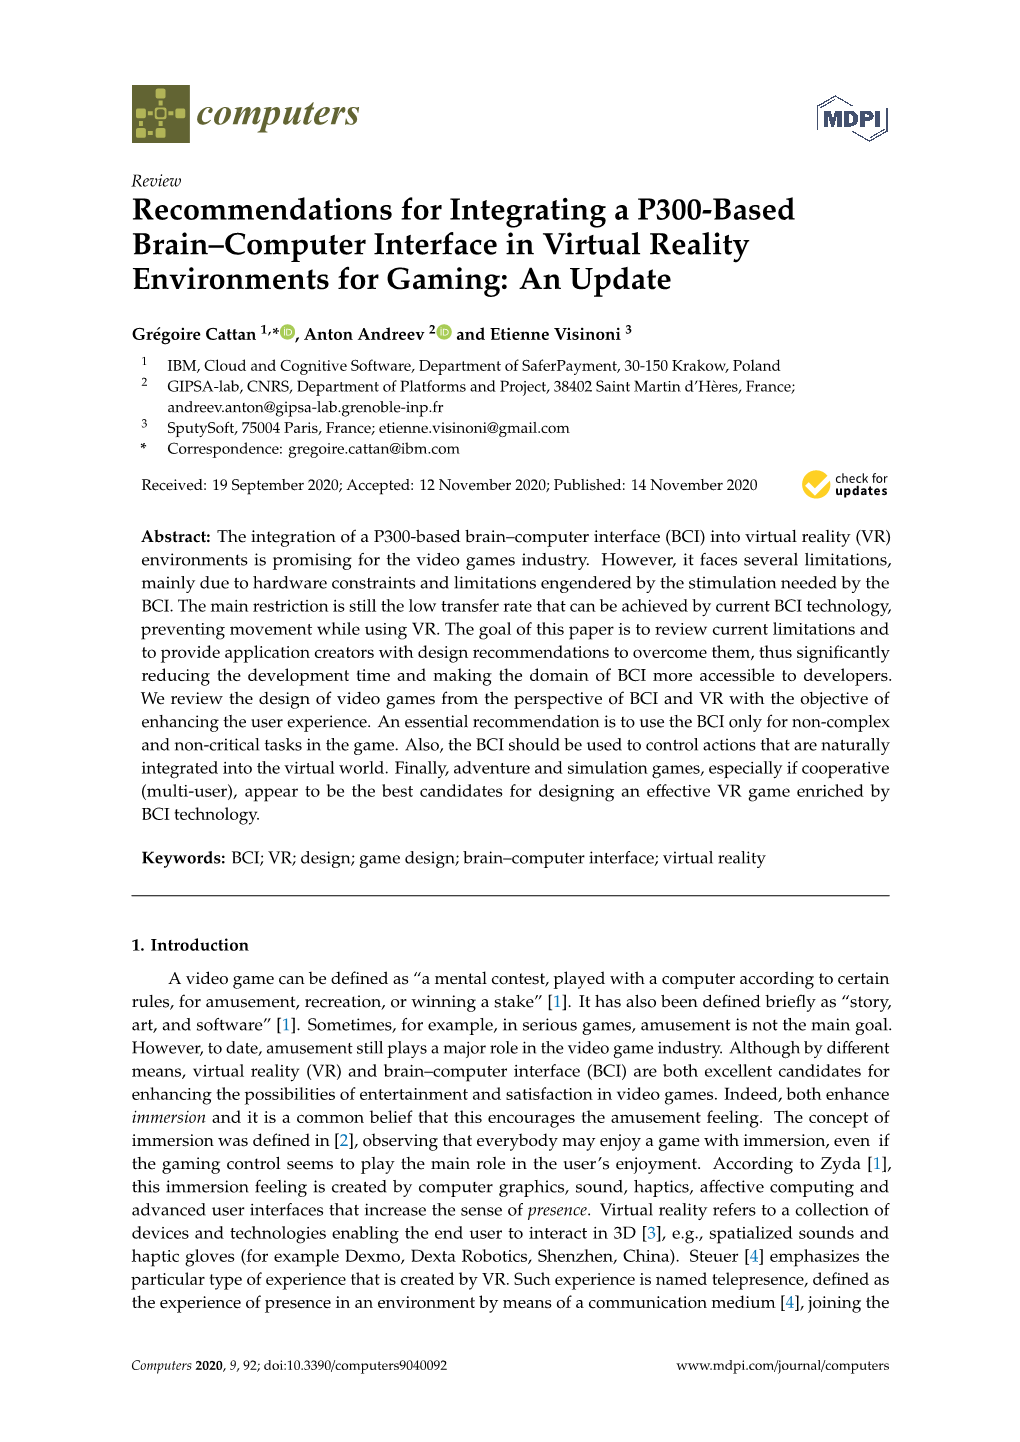 Recommendations for Integrating a P300-Based Brain–Computer Interface in Virtual Reality Environments for Gaming: an Update